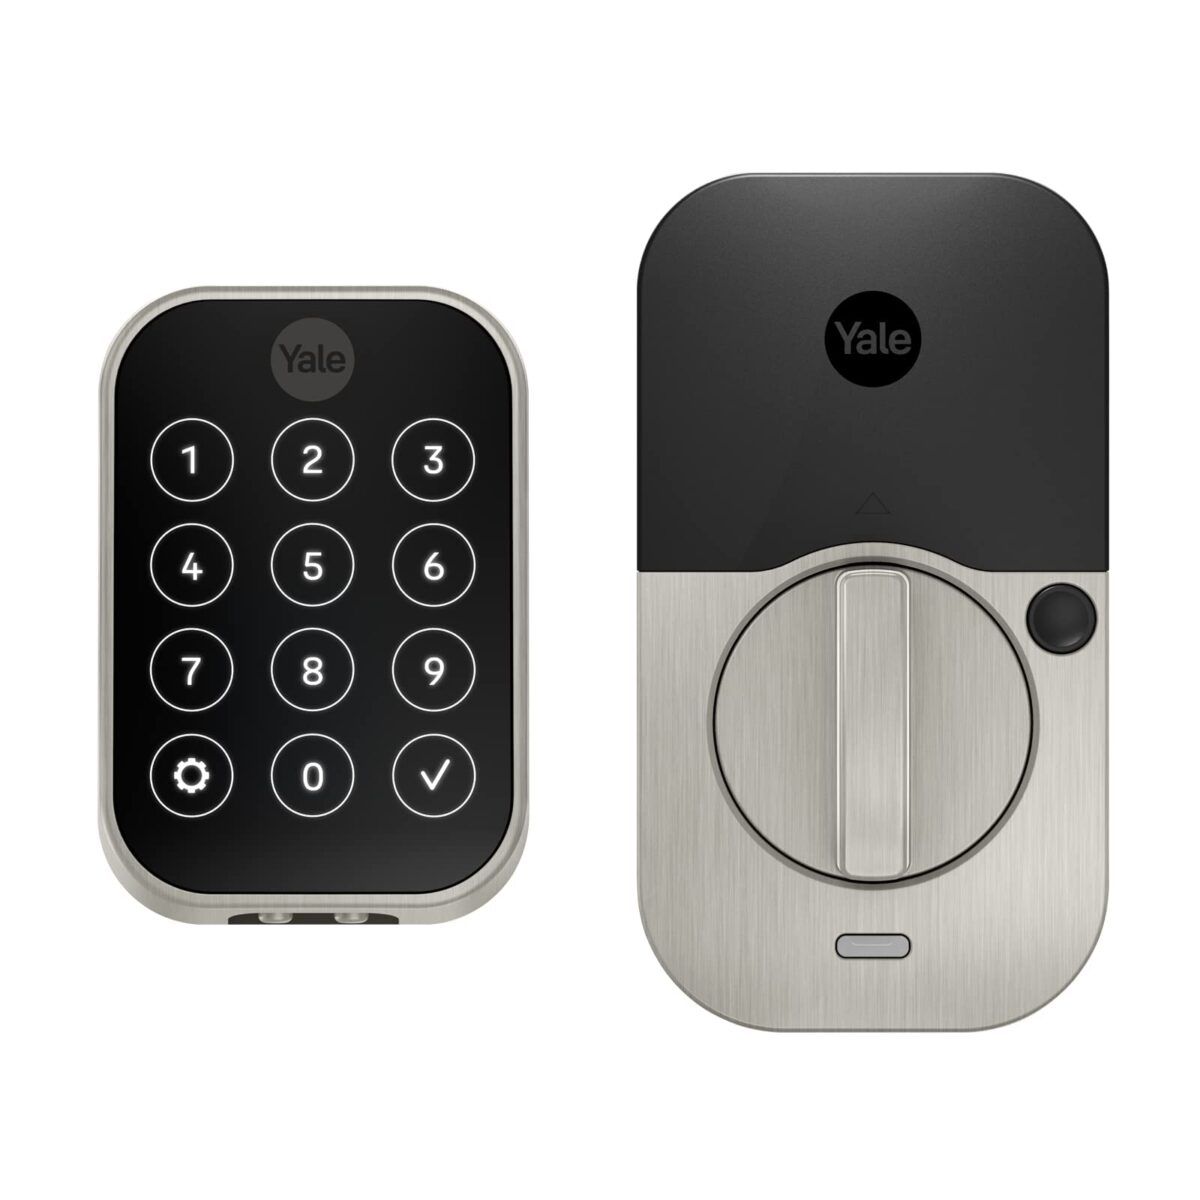 Google Smart Lock: The complete guide